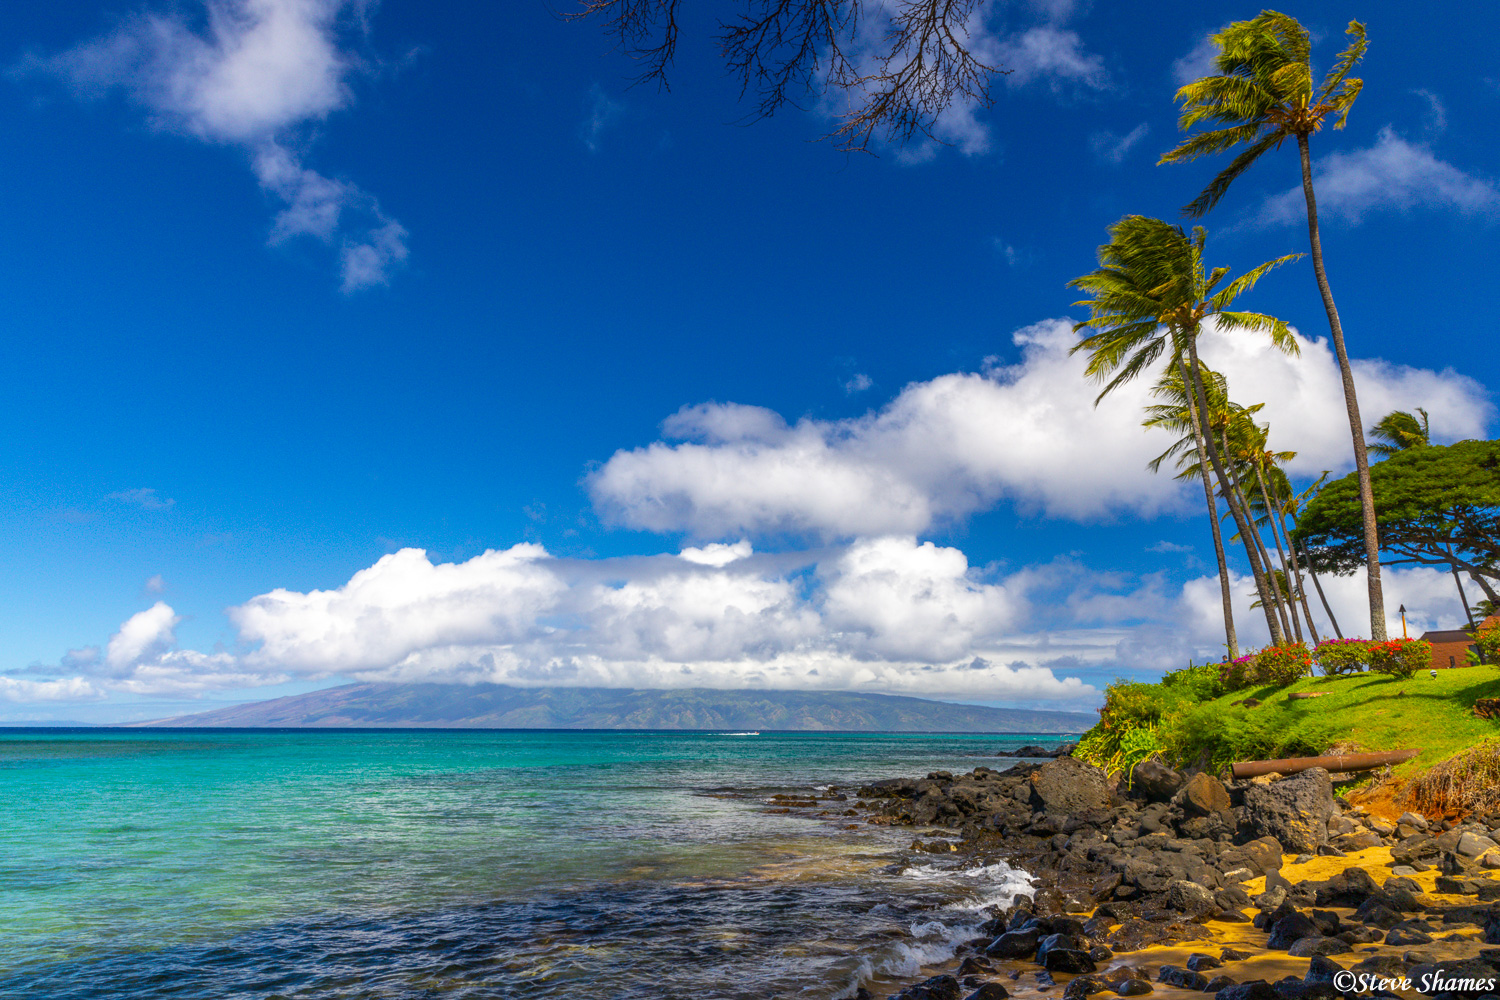 A view of the coastline at Lahaina, Maui. The palm trees always enhance the view.